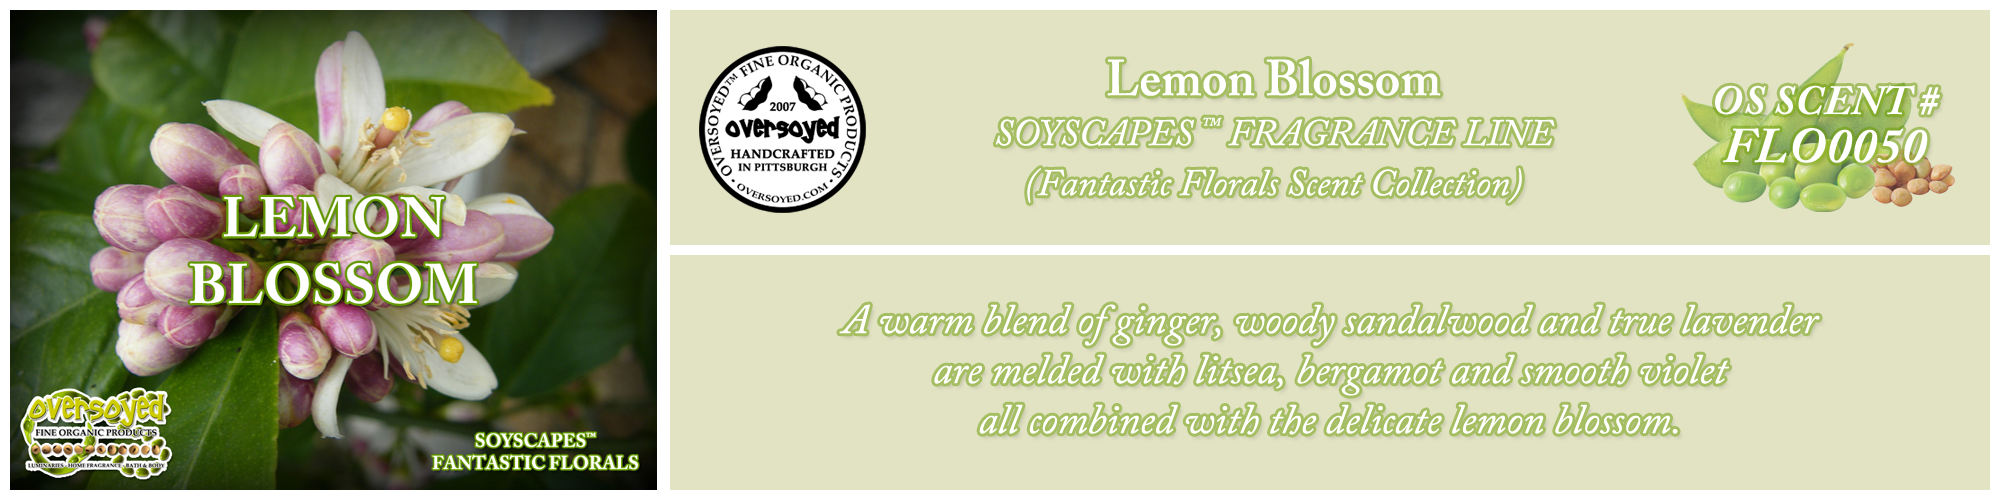 Lemon Blossom Handcrafted Products Collection